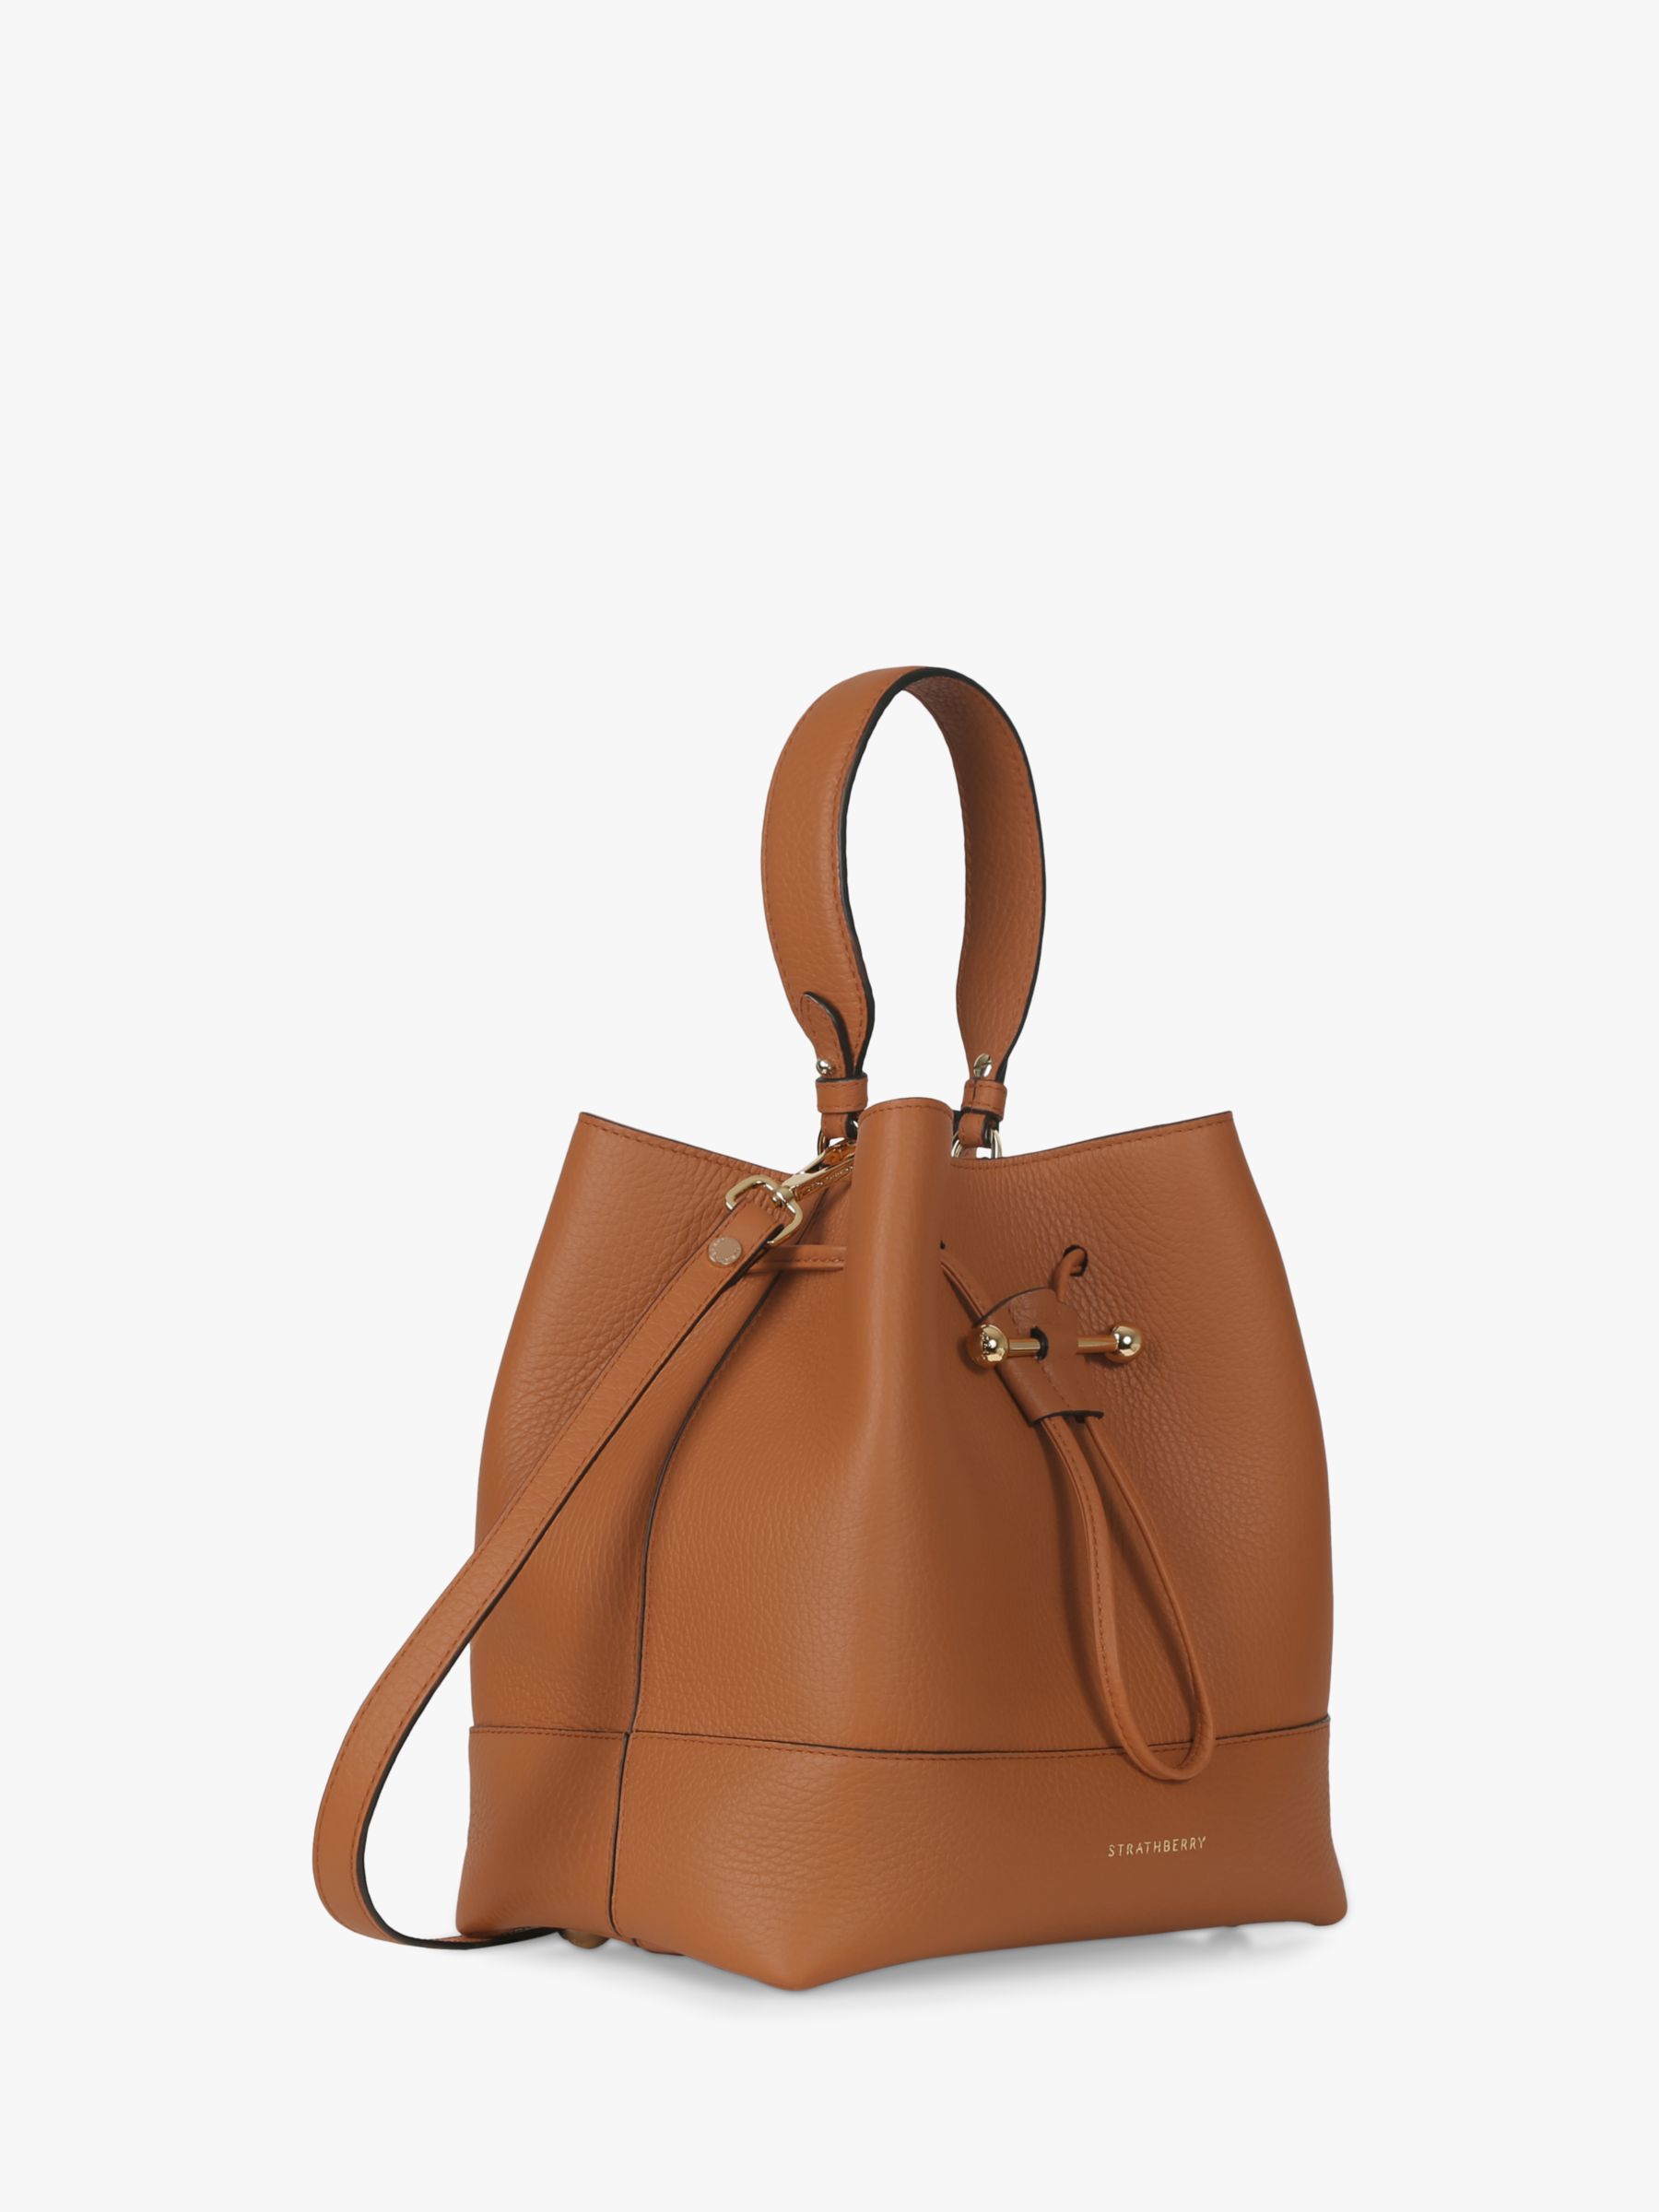 Strathberry Lana Osette Midi Bag in Natural